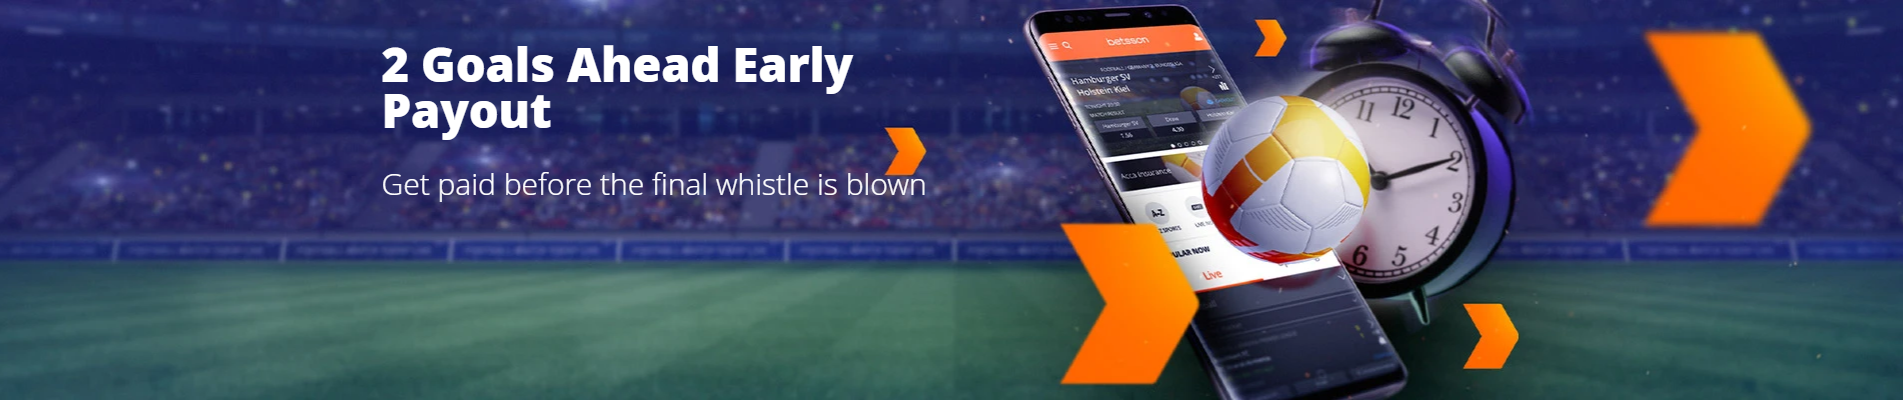 bookmaker betsson early payout offer